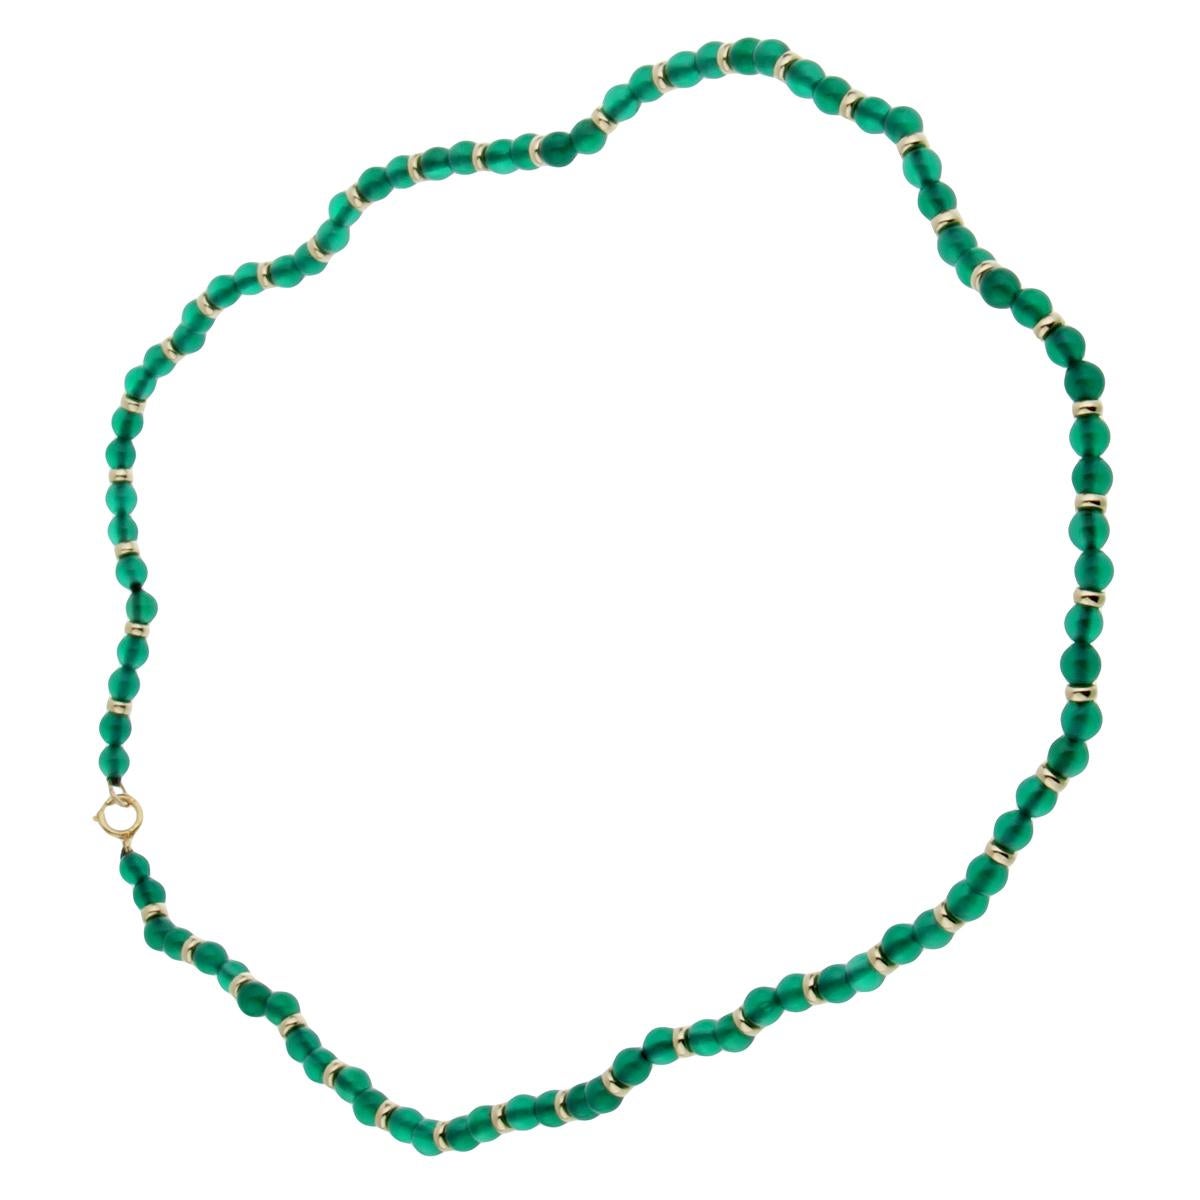 Van Cleef & Arpels showcasing 4mm beaded chrysophase seperated by 18k yellow gold. The necklace measures 16